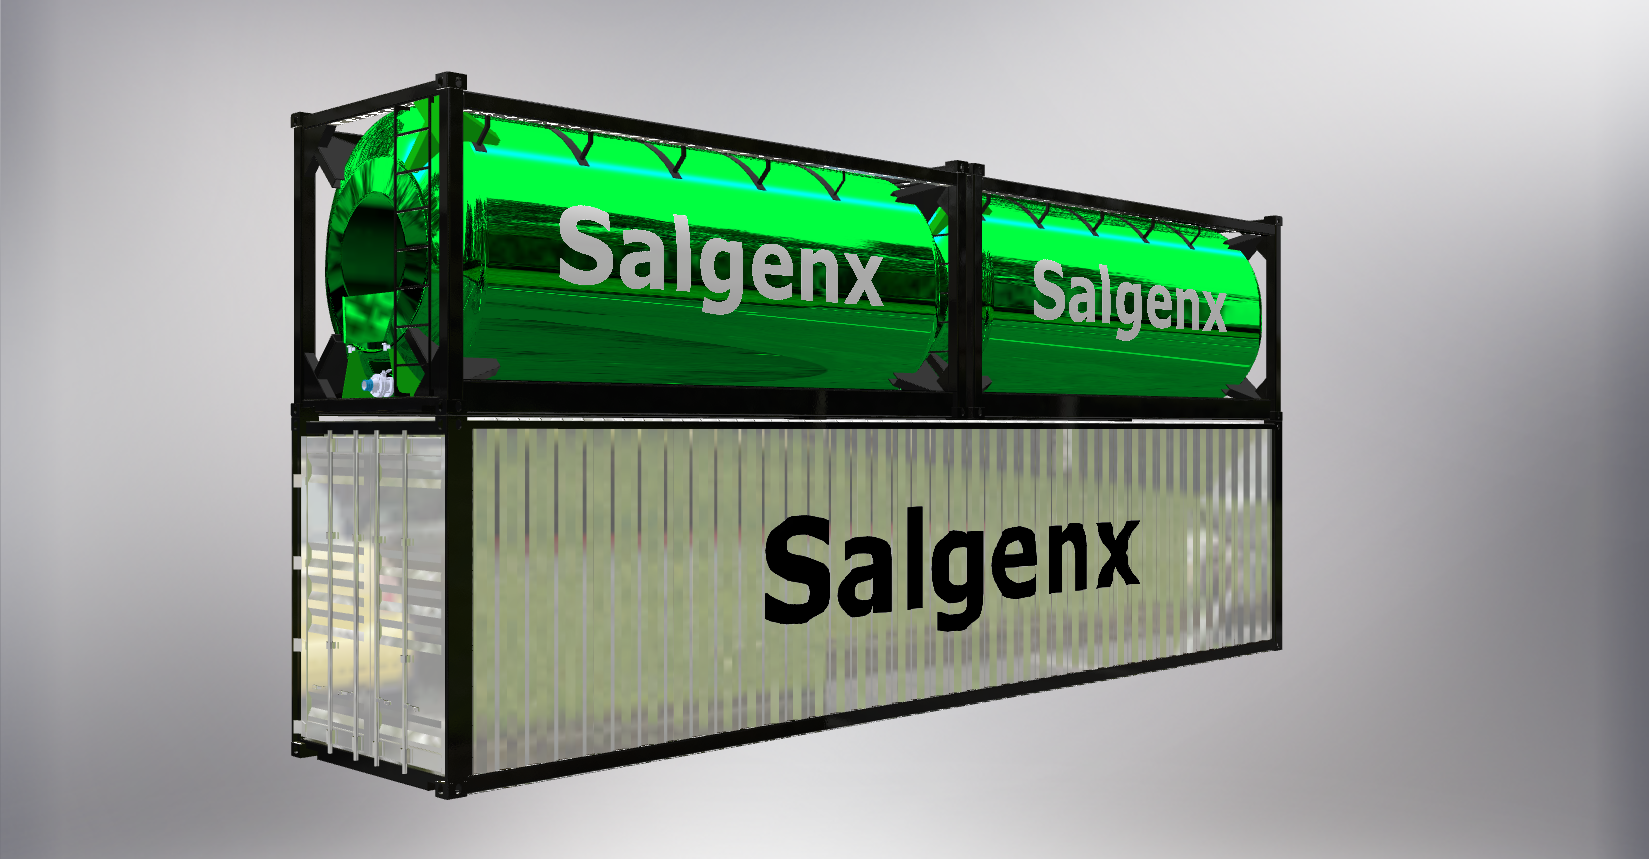 Salgenx Saltwater Battery system can be used for remote power